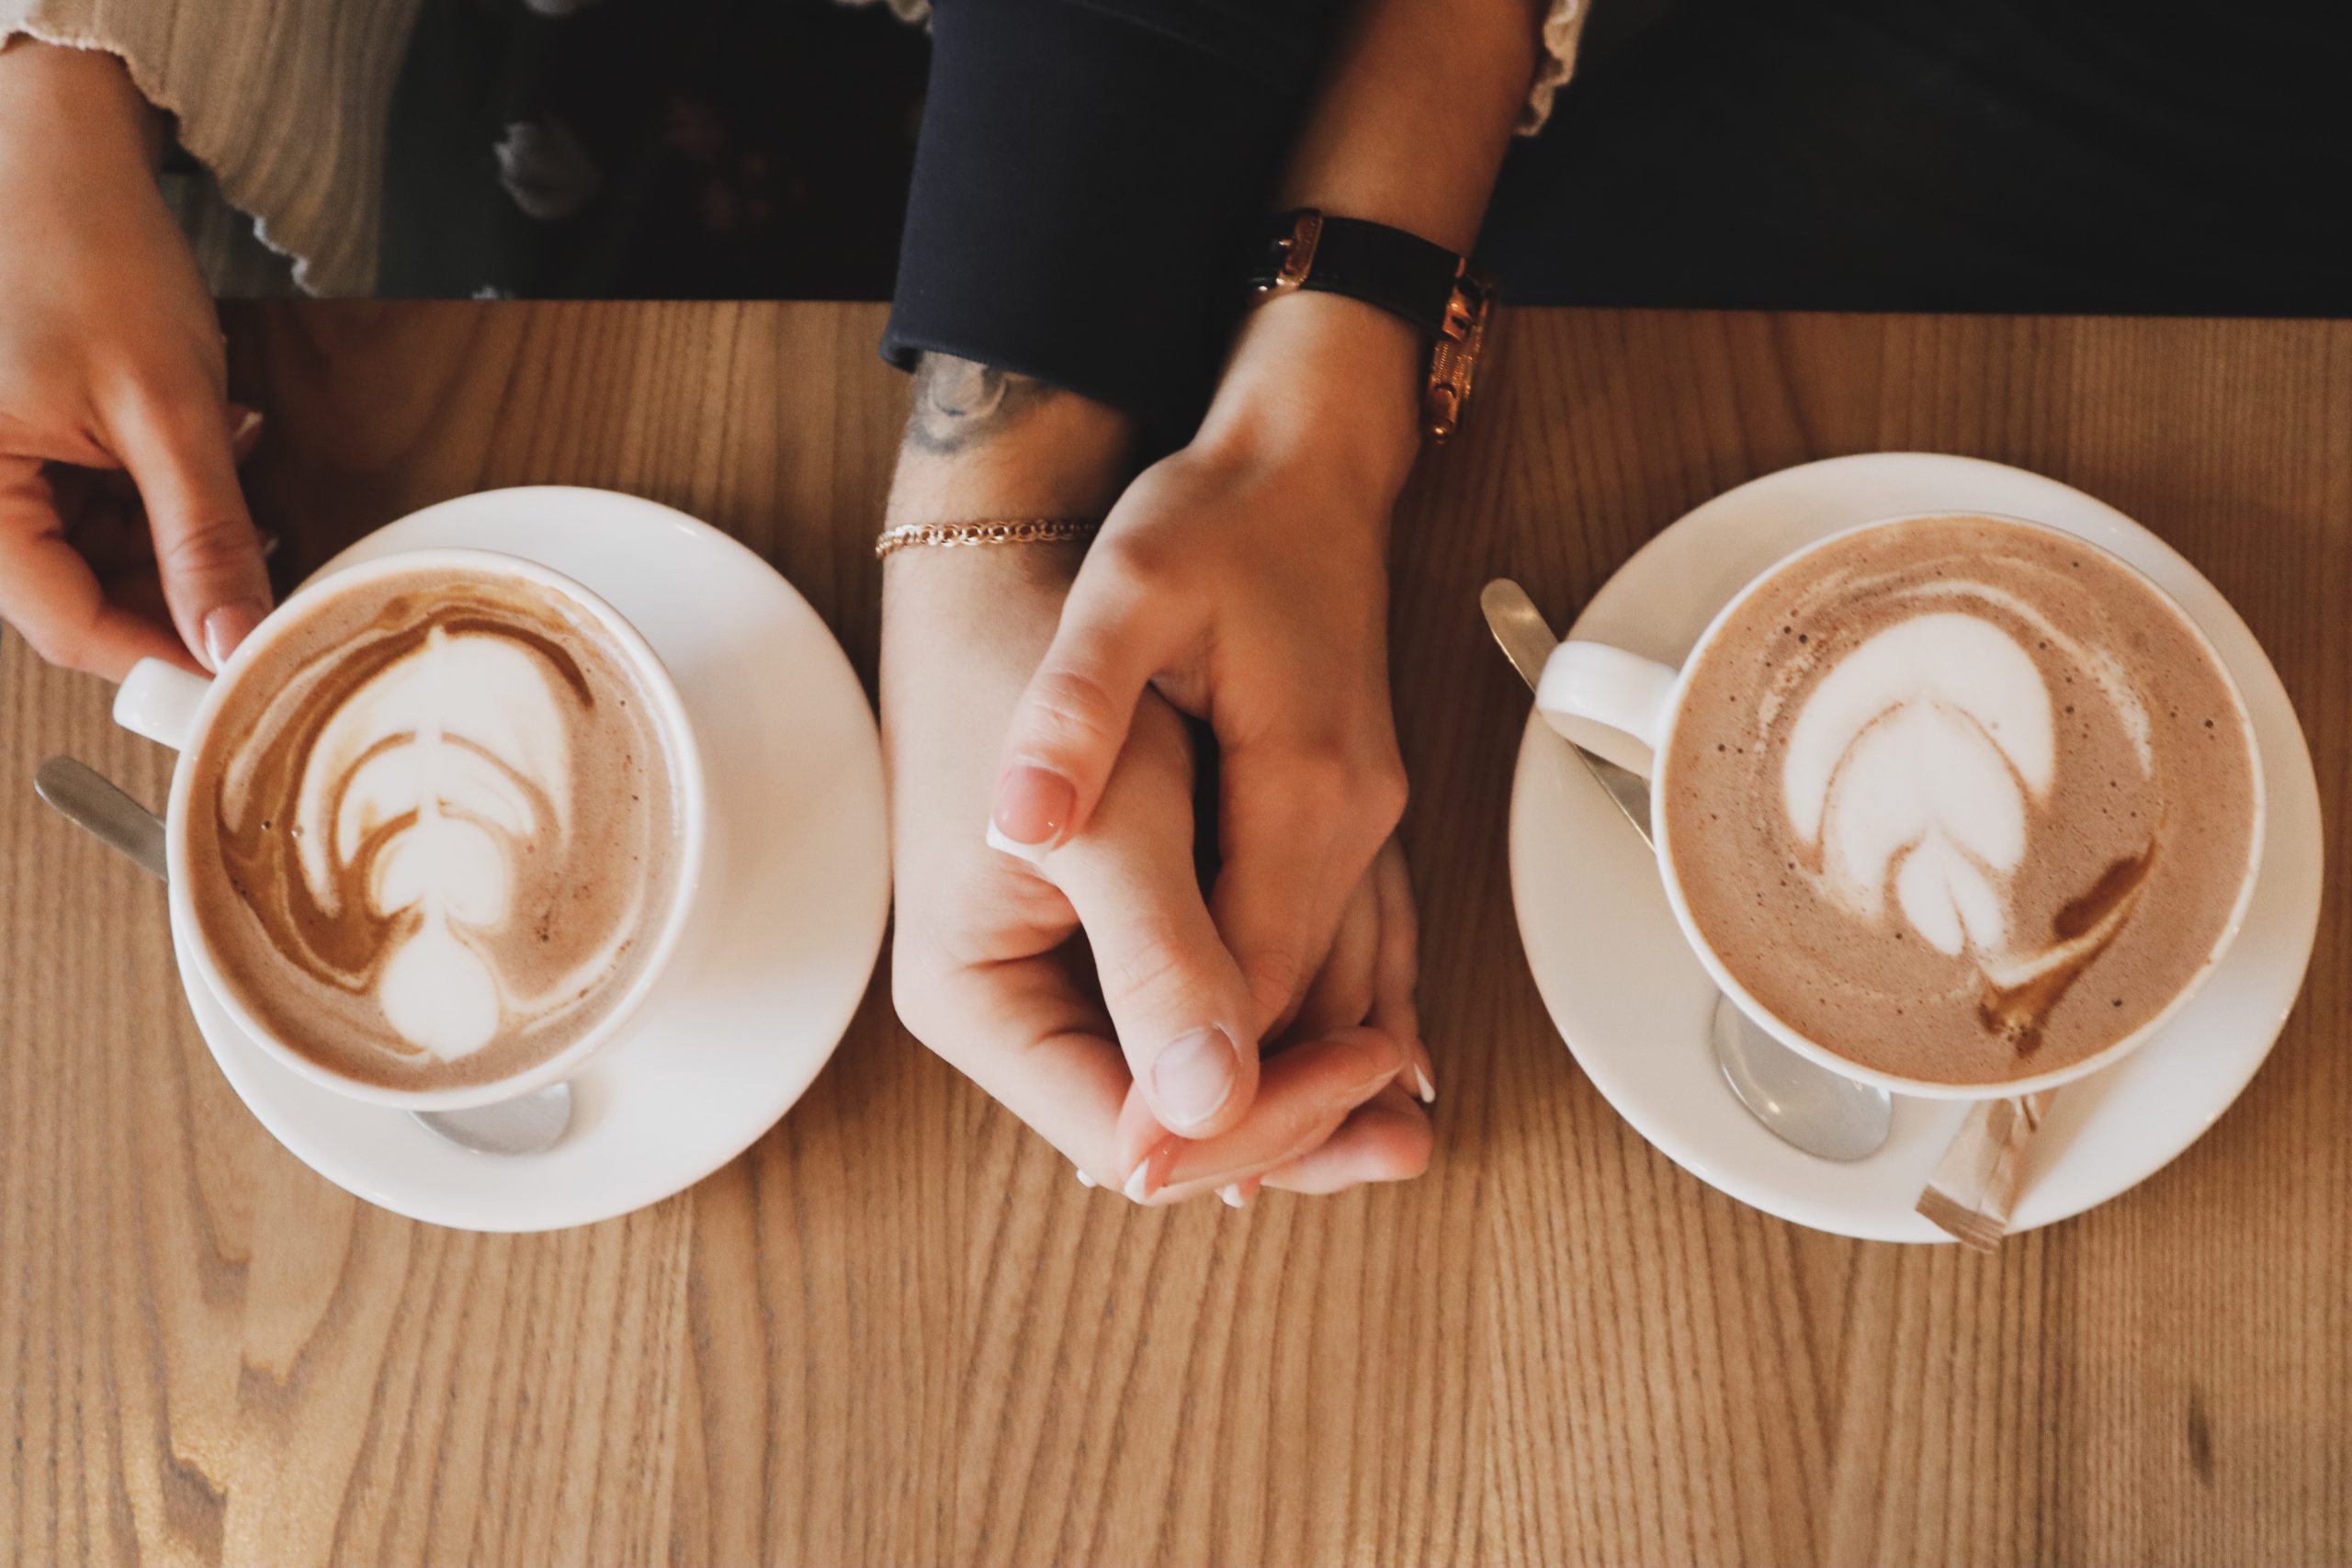 Two hands holding each other, and coffee